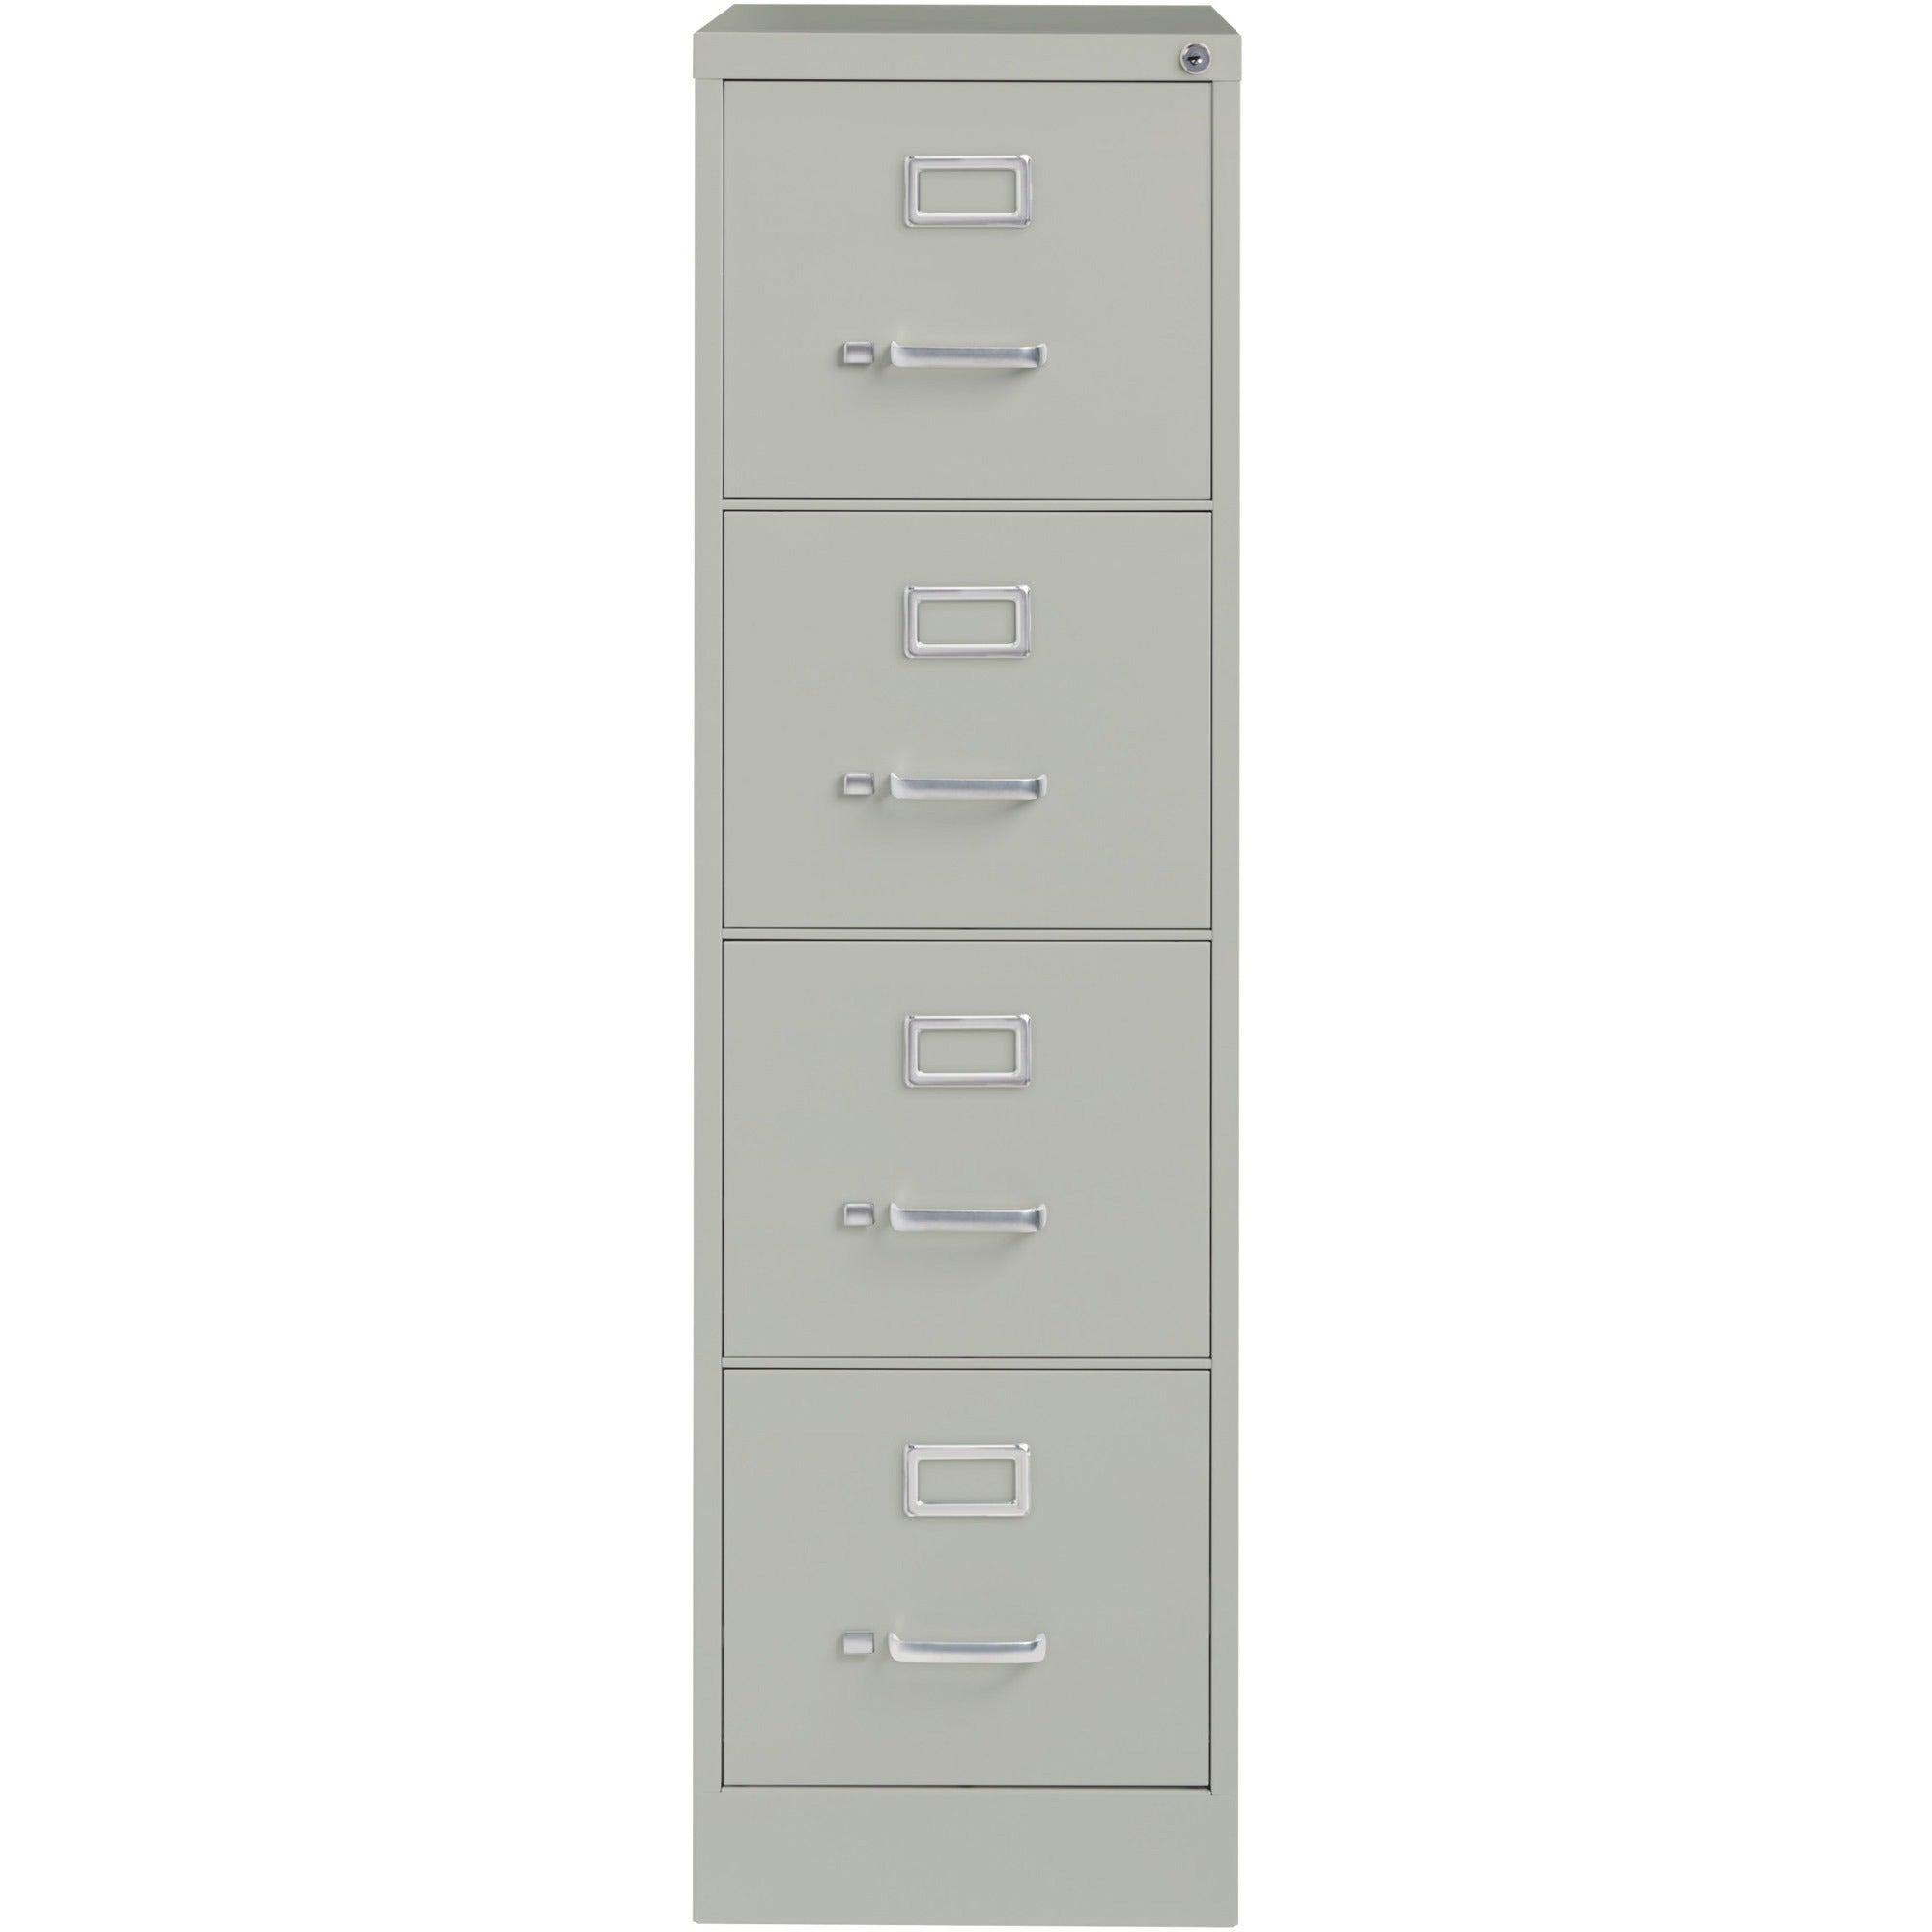 Lorell Fortress Series 26-1/2" Commercial-Grade Vertical File Cabinet - 15" x 26.5" x 52" - 4 x Drawer(s) for File - Letter - Vertical - Security Lock, Ball-bearing Suspension, Heavy Duty - Light Gray - Steel - Recycled - 